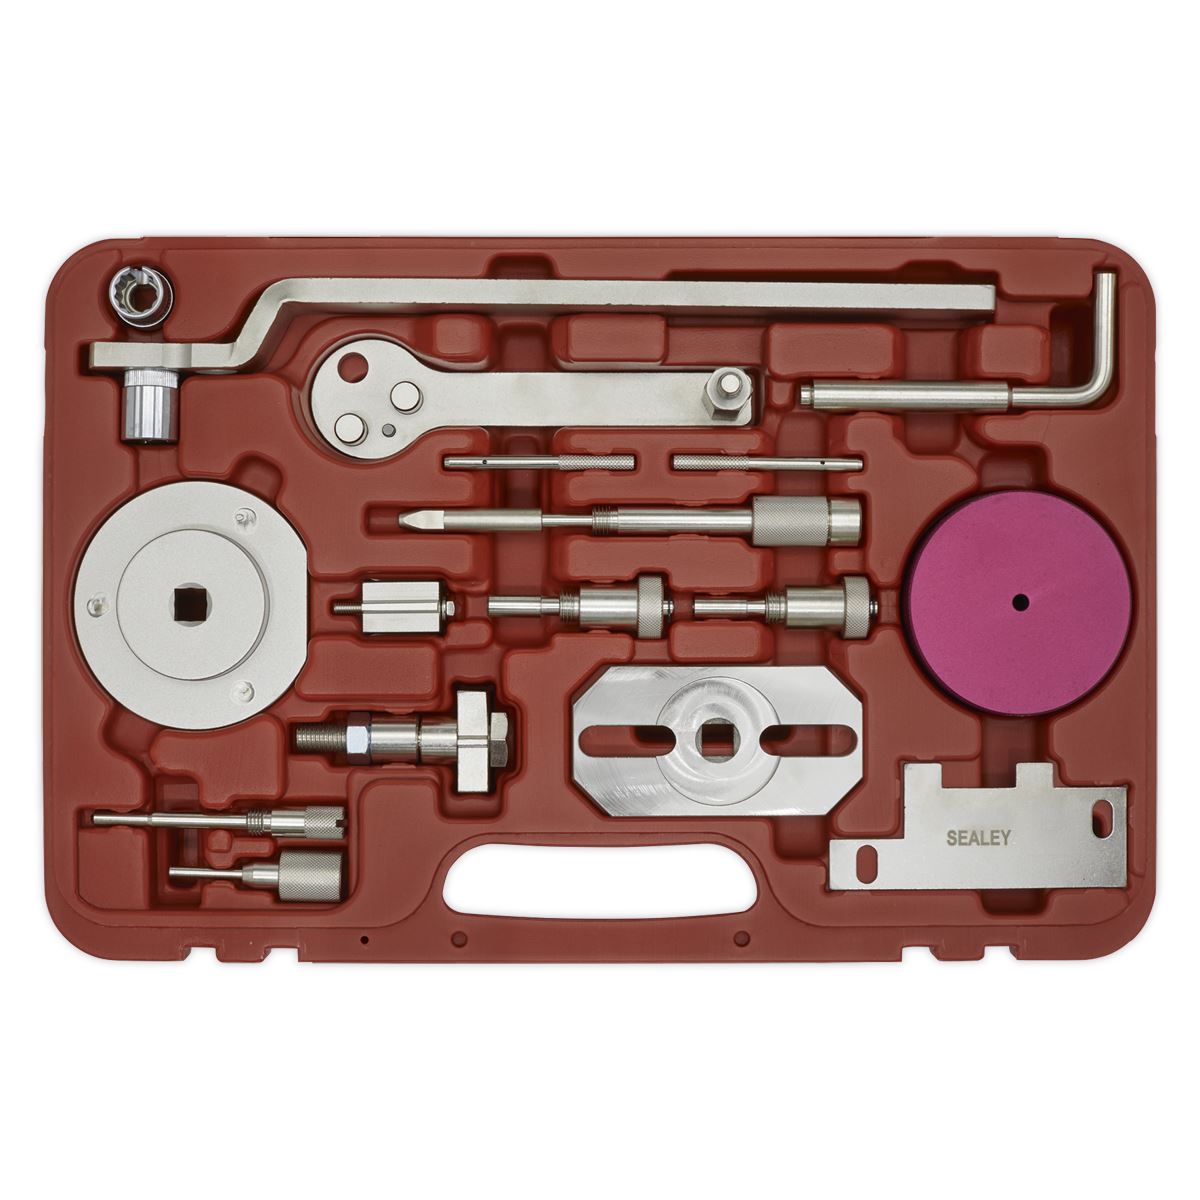 Sealey Diesel Engine Timing Tool Kit for Fiat, Ford, Iveco, PSA - 2.2D/2.3D/3.0D - Belt/Chain Drive